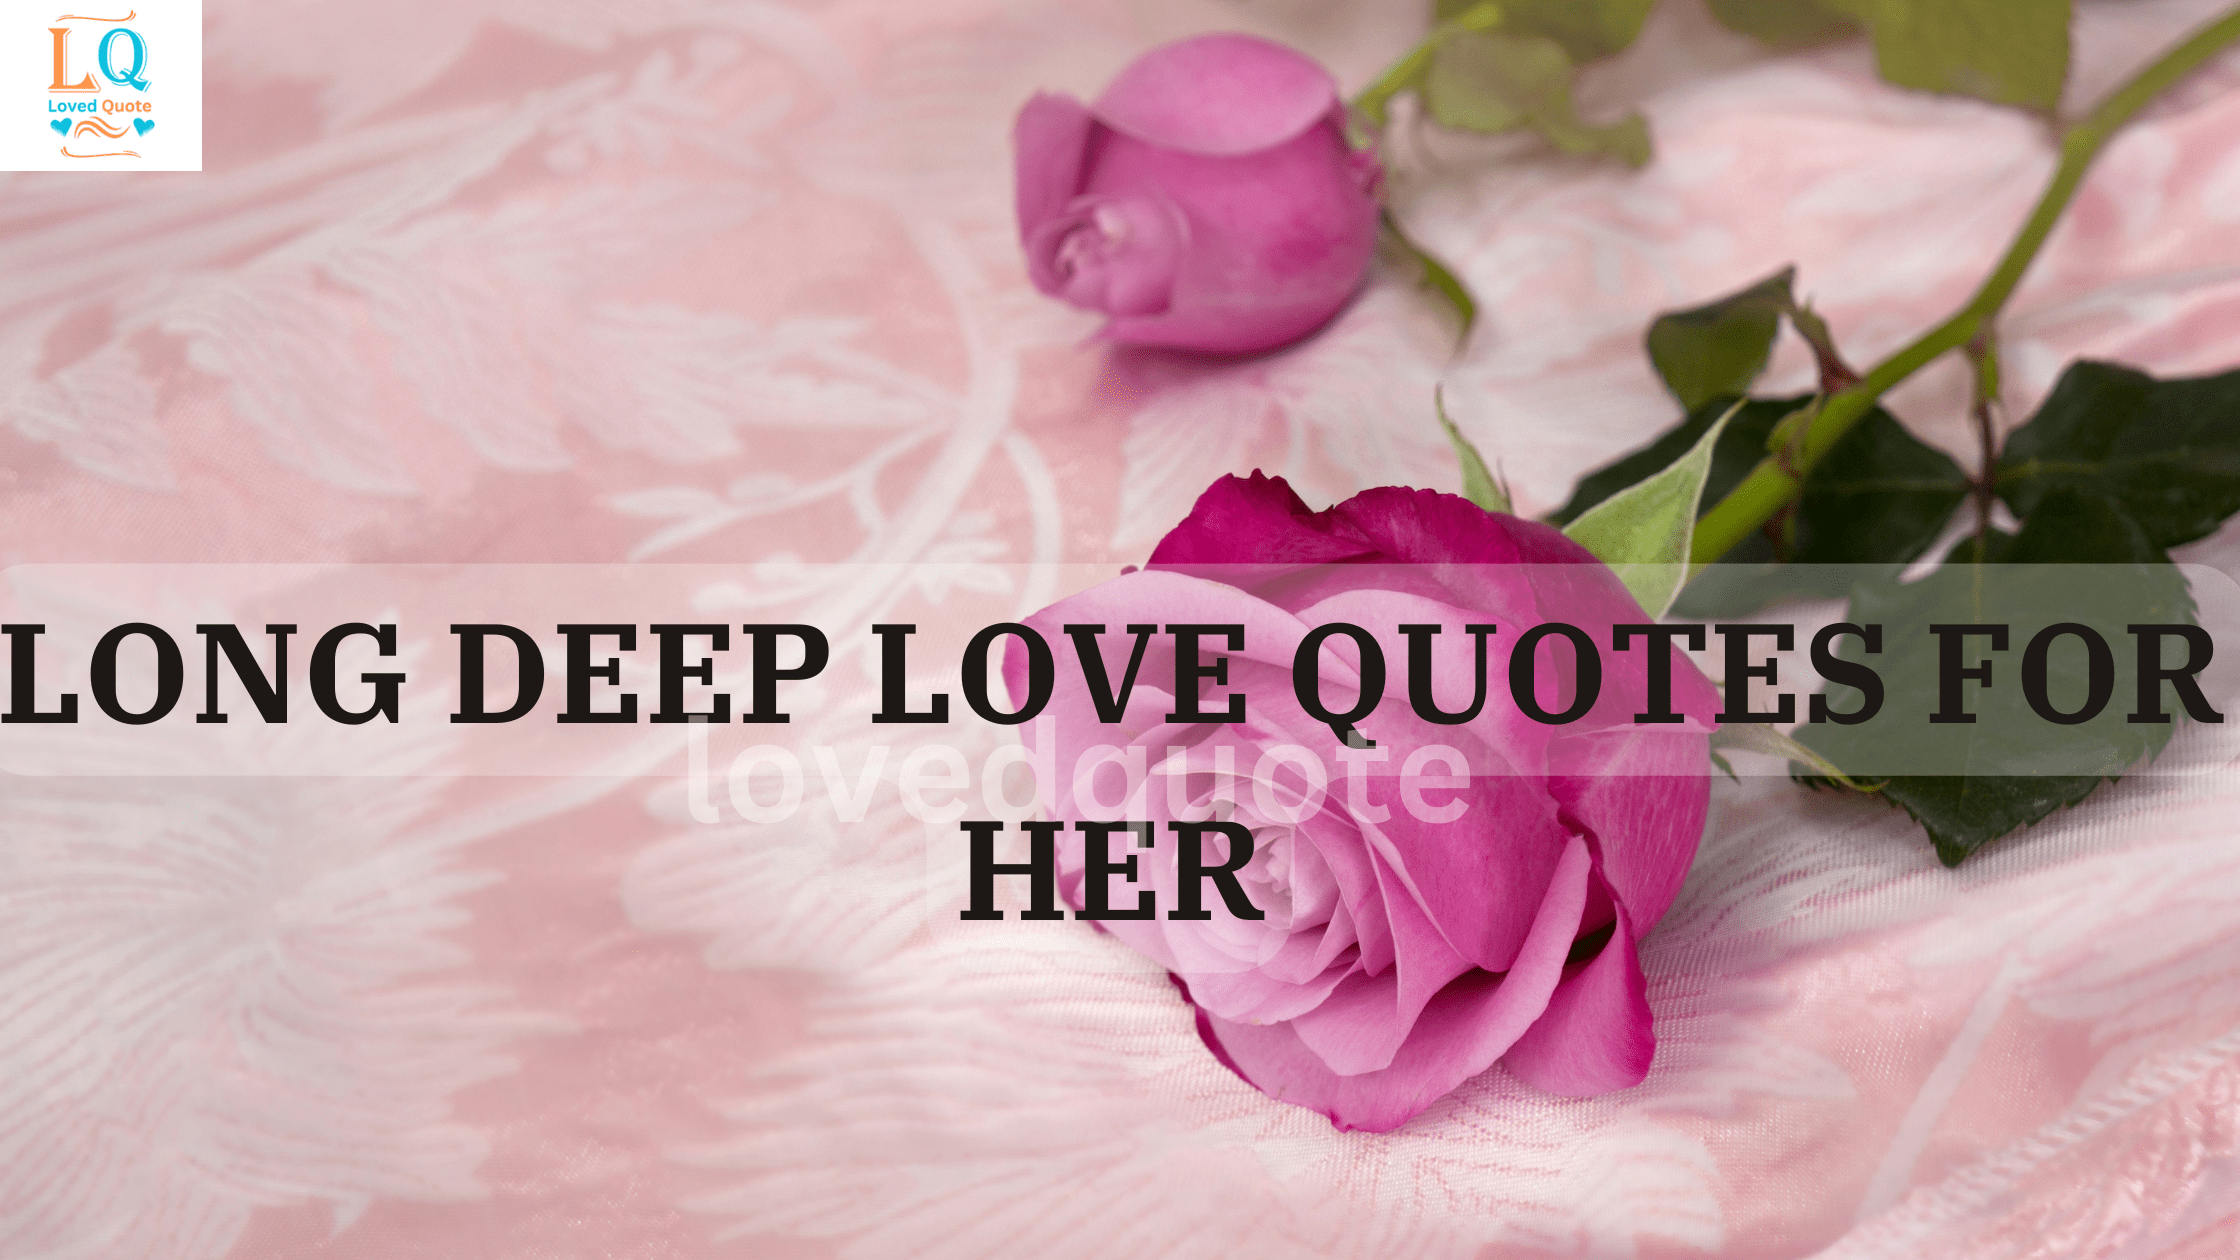 Long Deep Love Quotes for Her